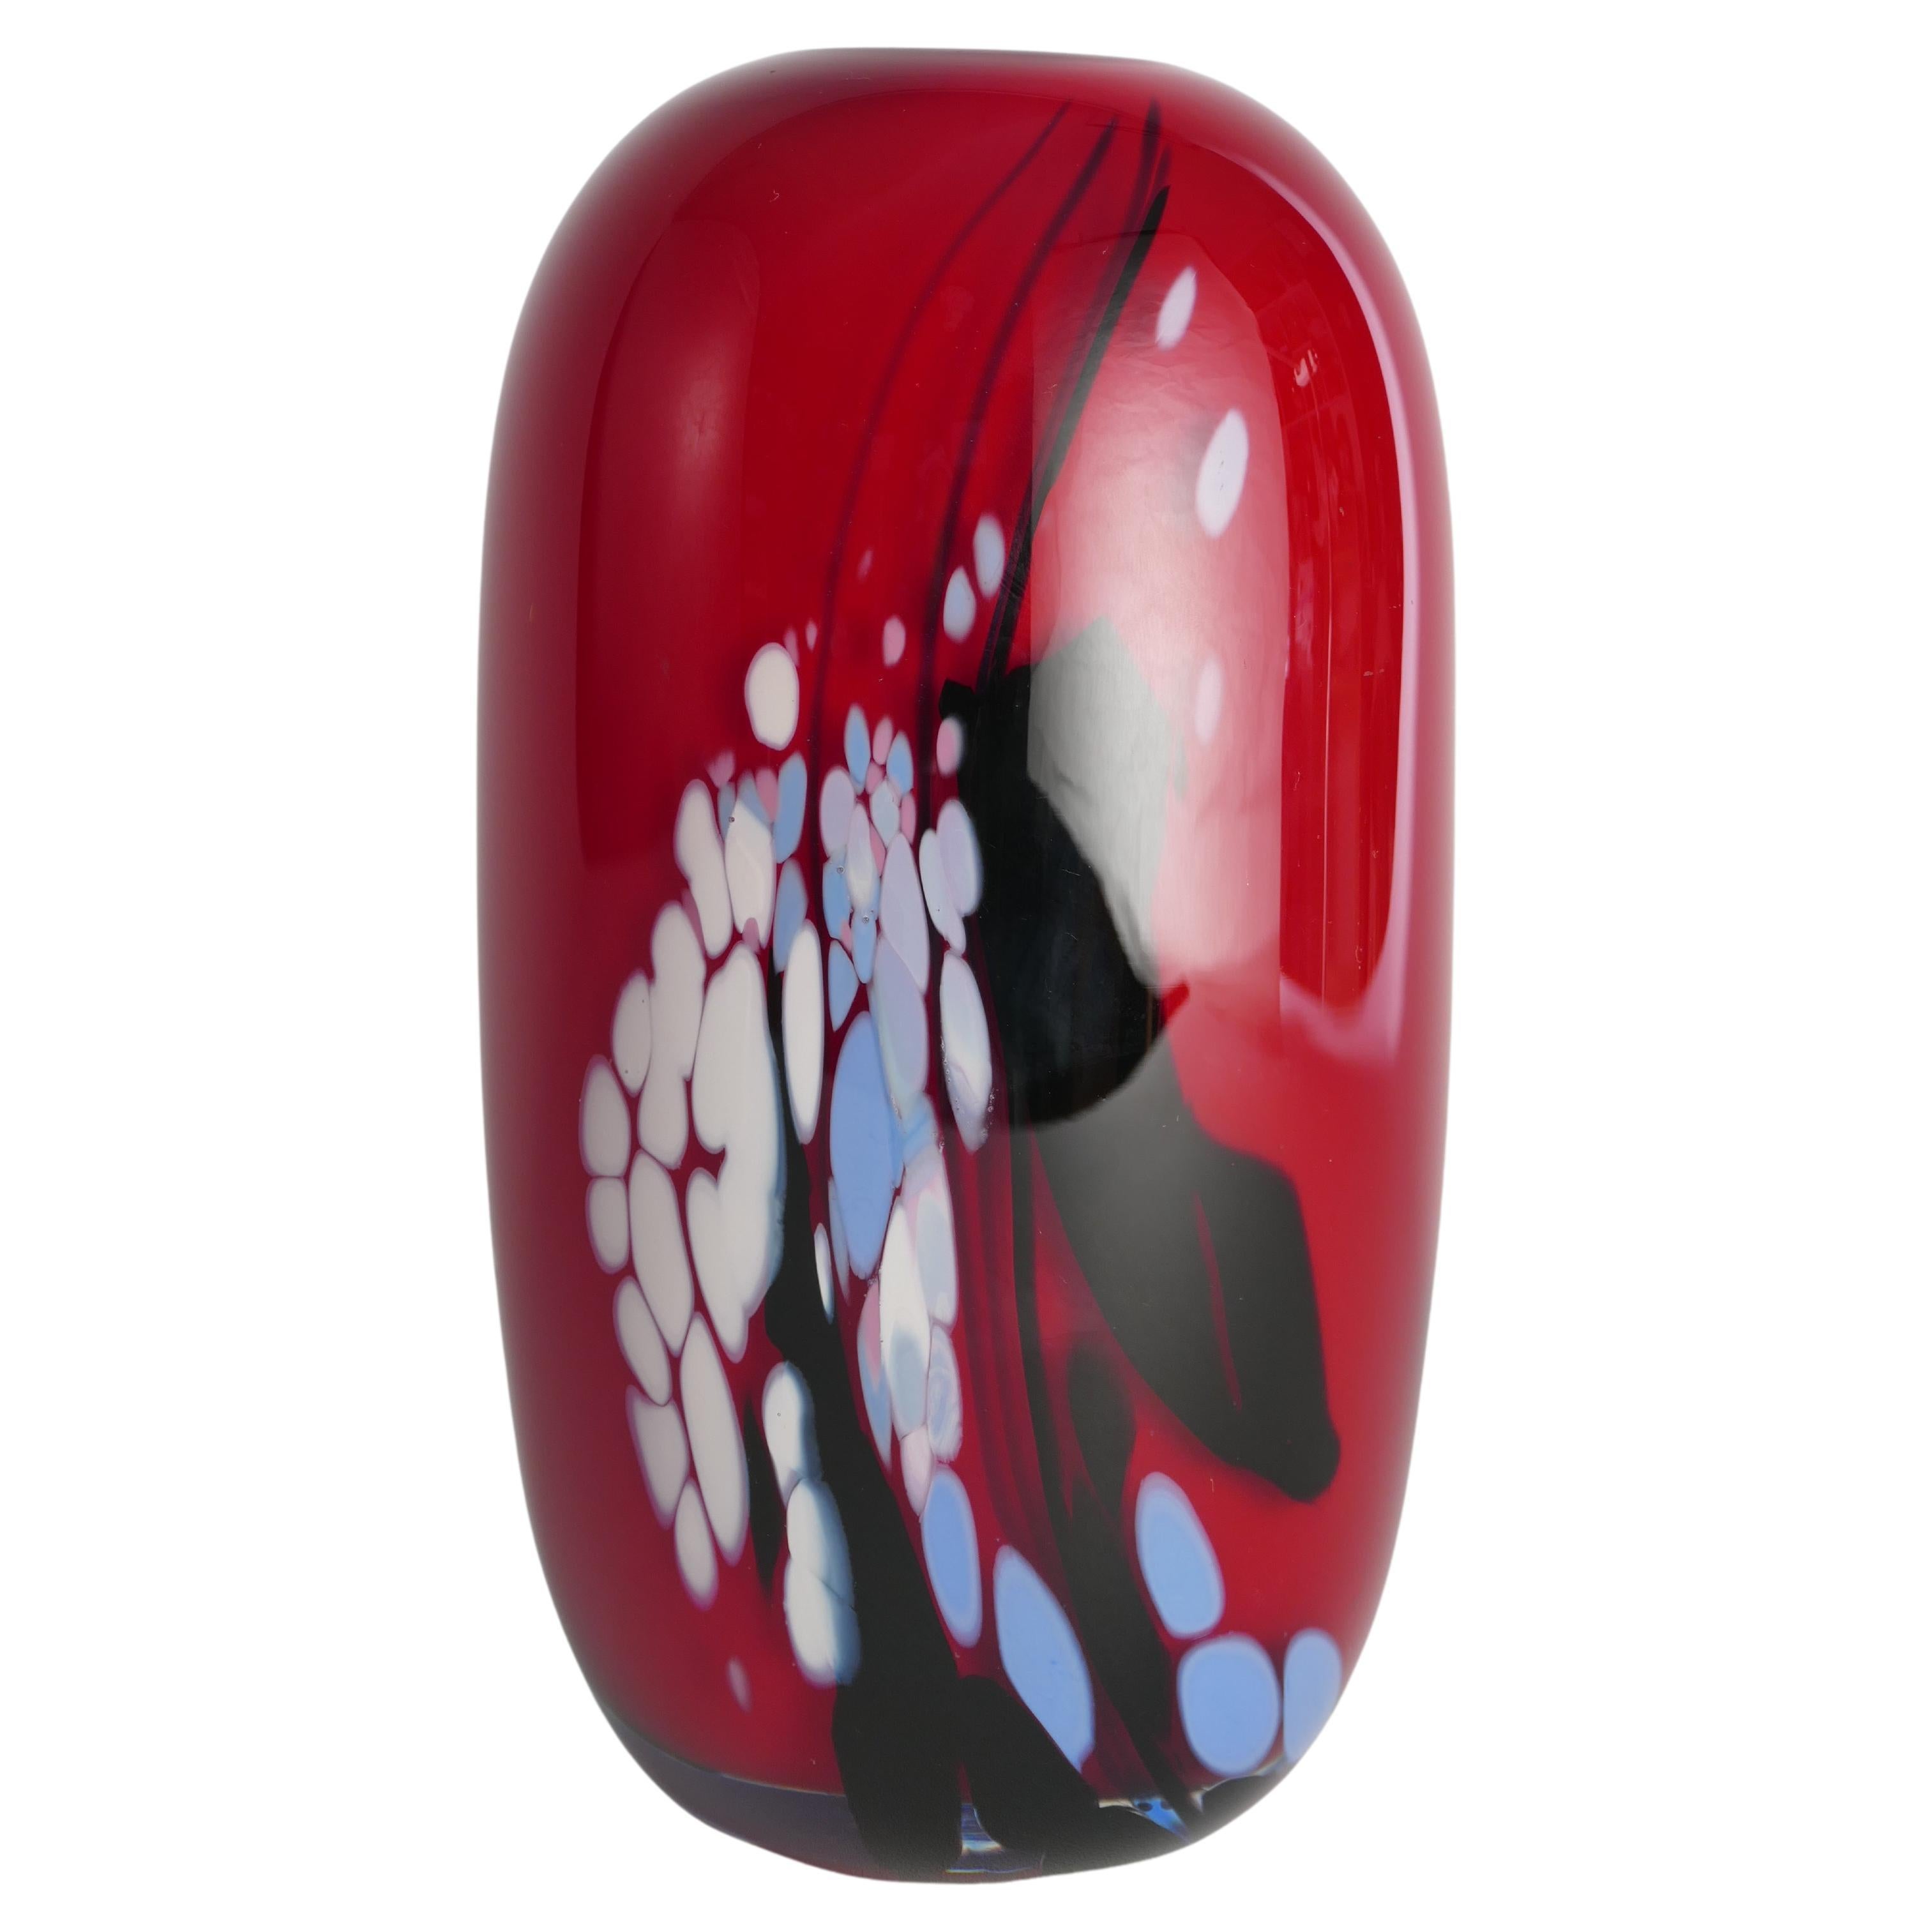 Unique Cherry Red Art Glass Vase by Mikael Axenbrant, Sweden 1990